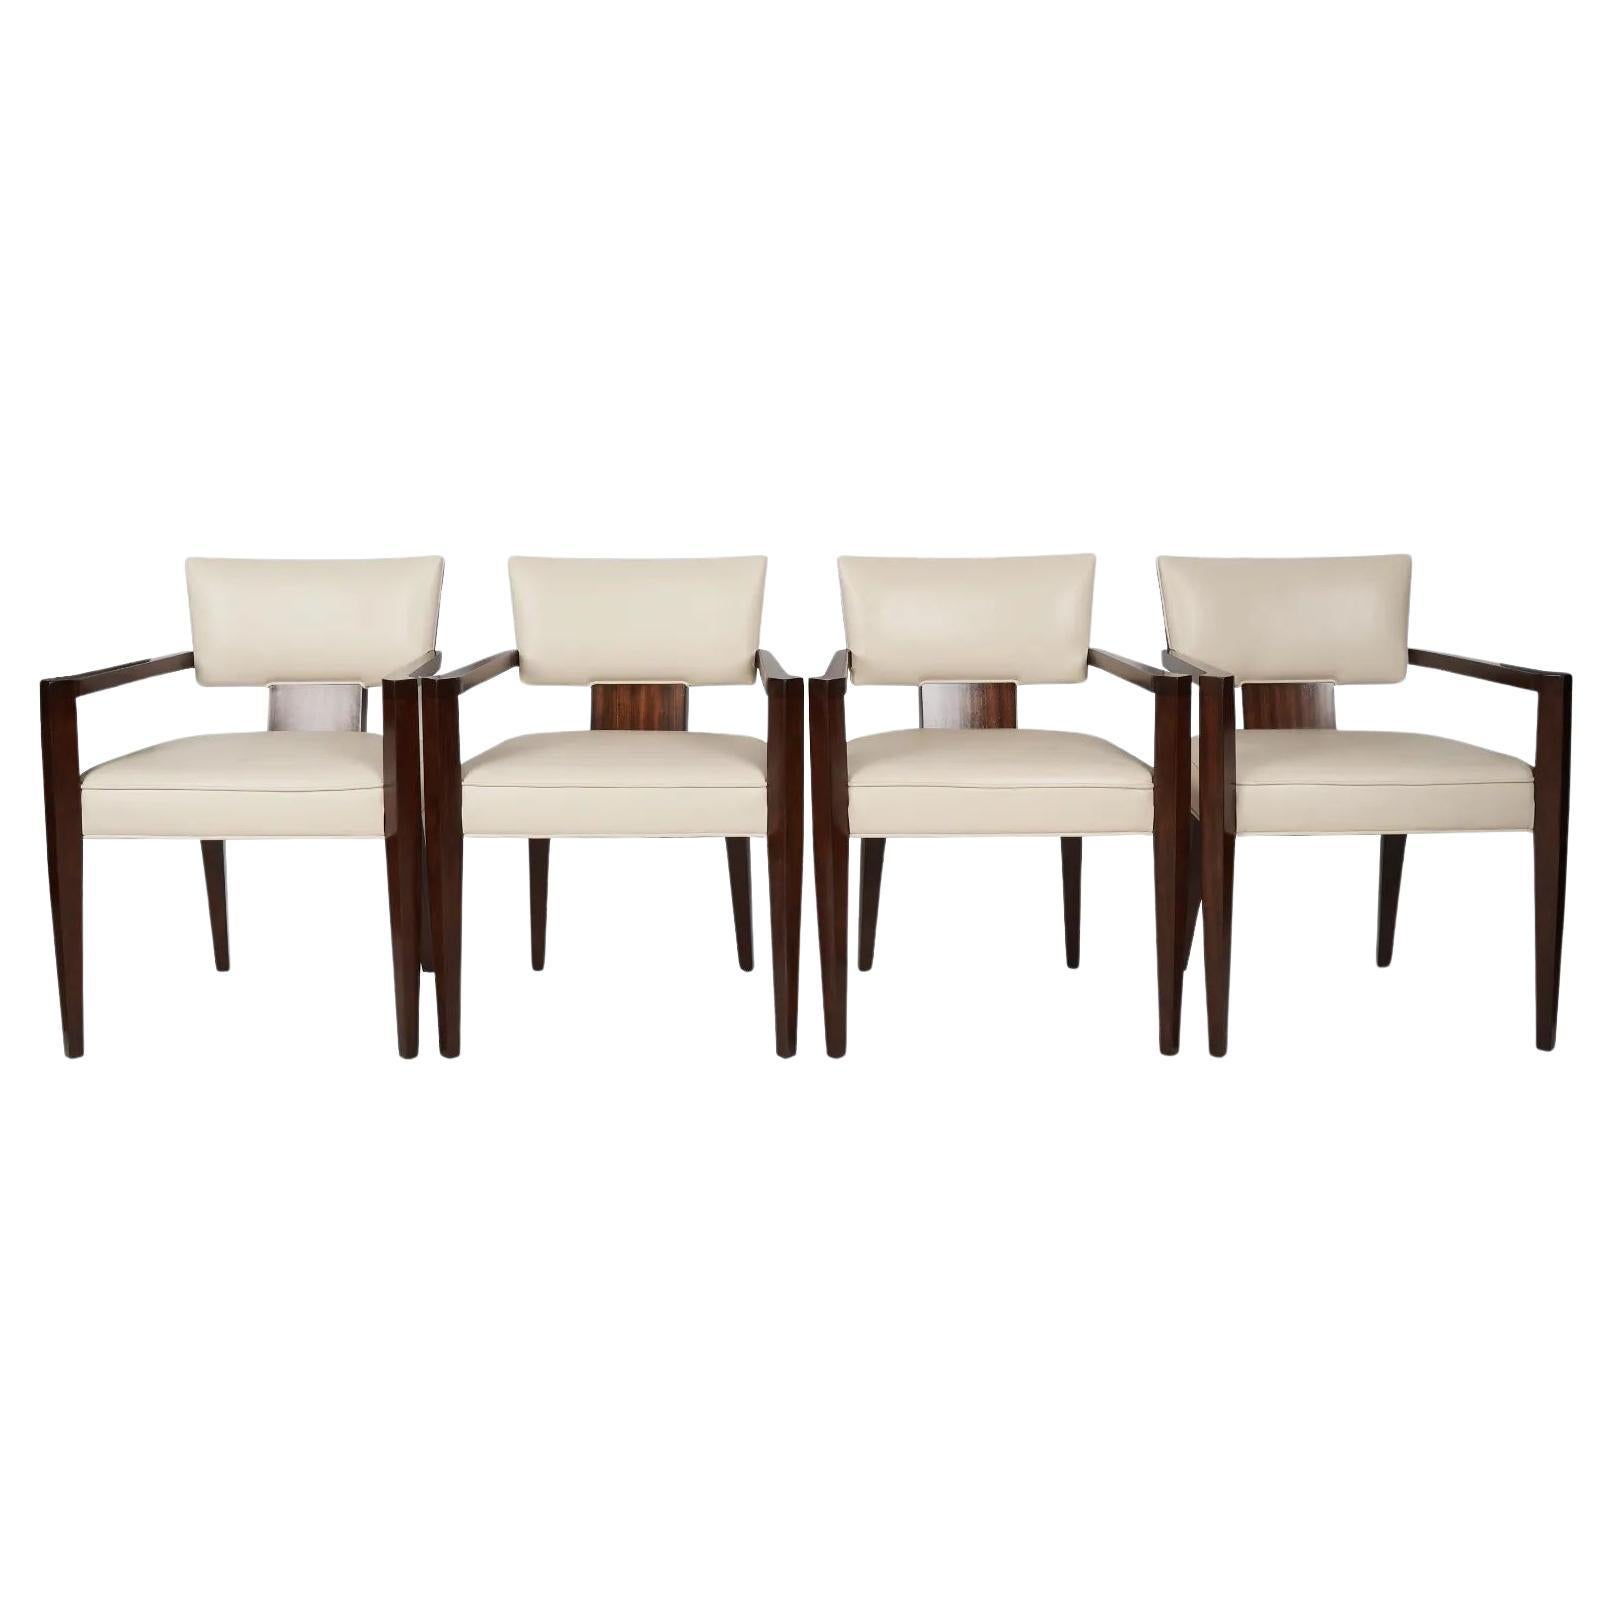 Set of 4 Unused Theodore Alexander "55 Broadway" Upholstered Arm Chairs For Sale